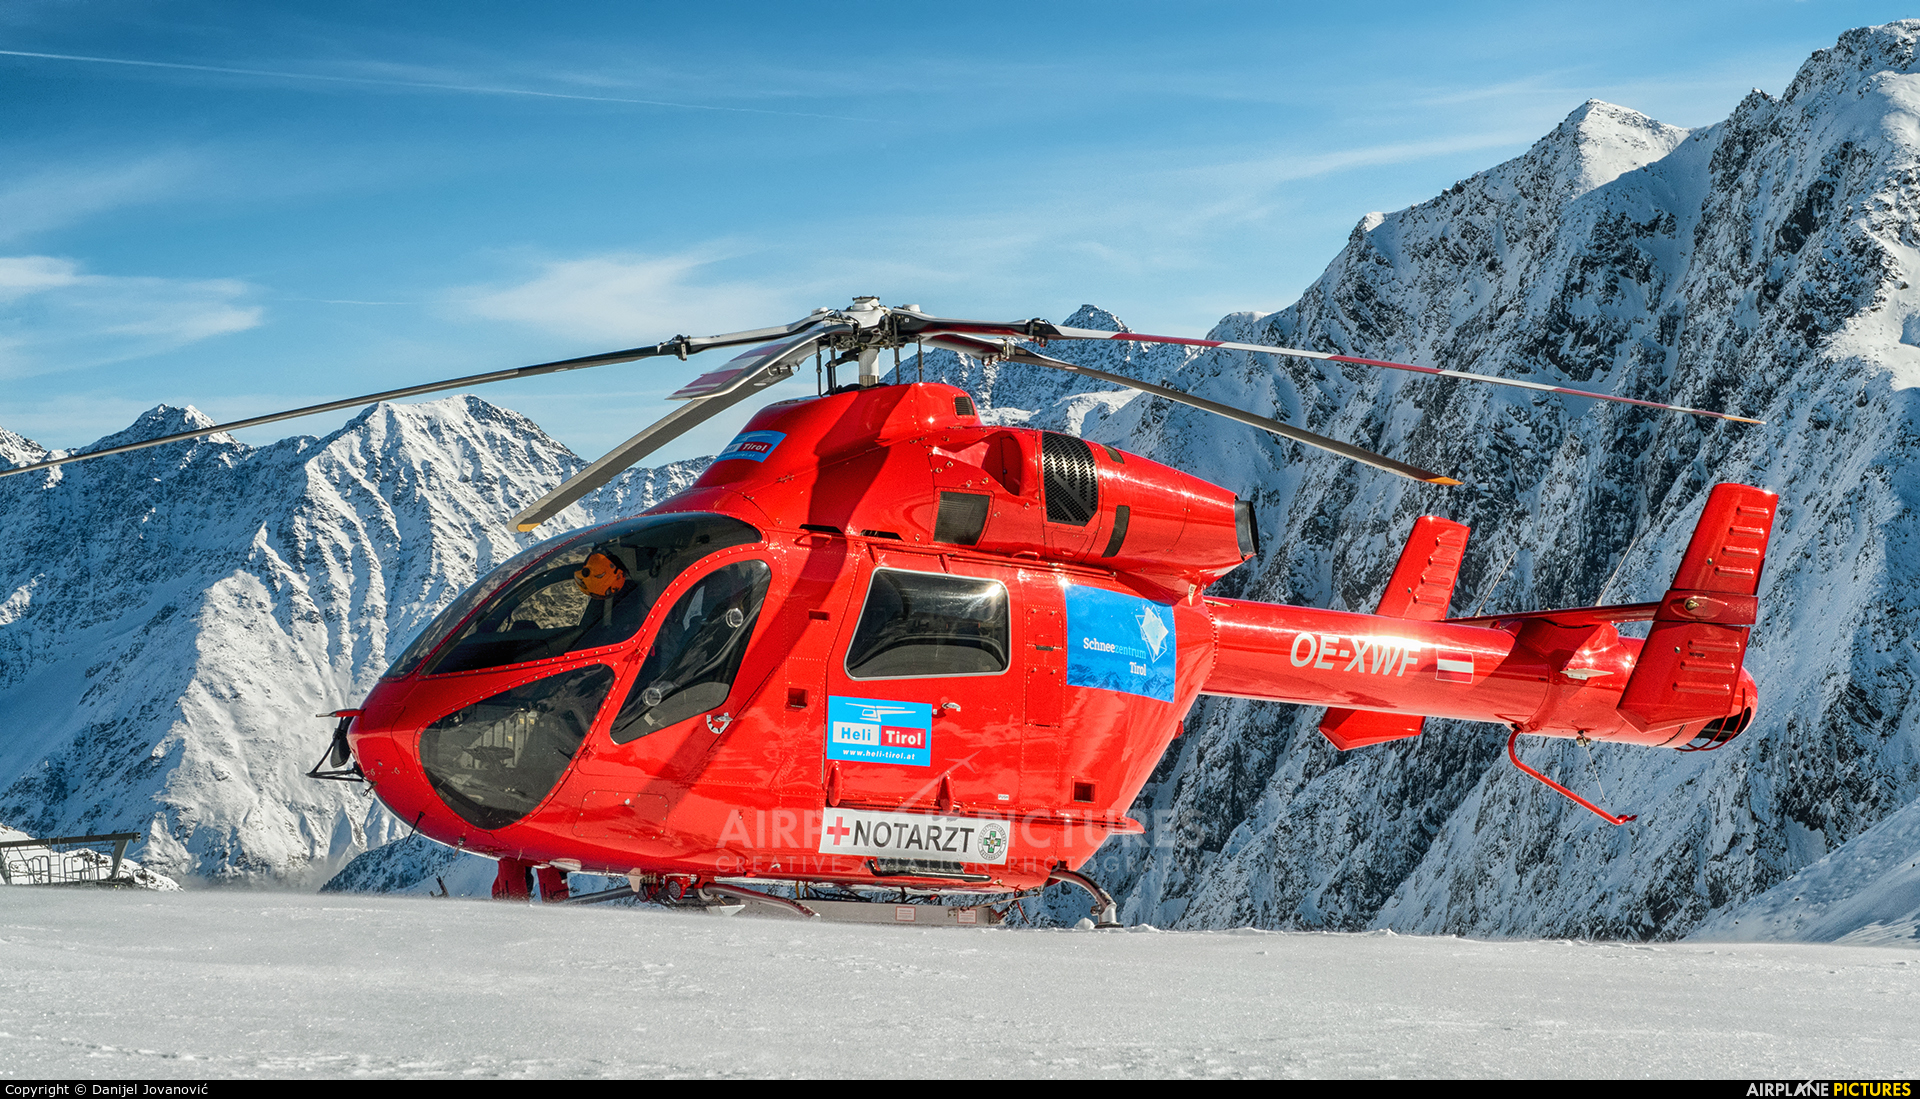 Knaus Helicopters OE-XWF aircraft at Stubaier Gletscher